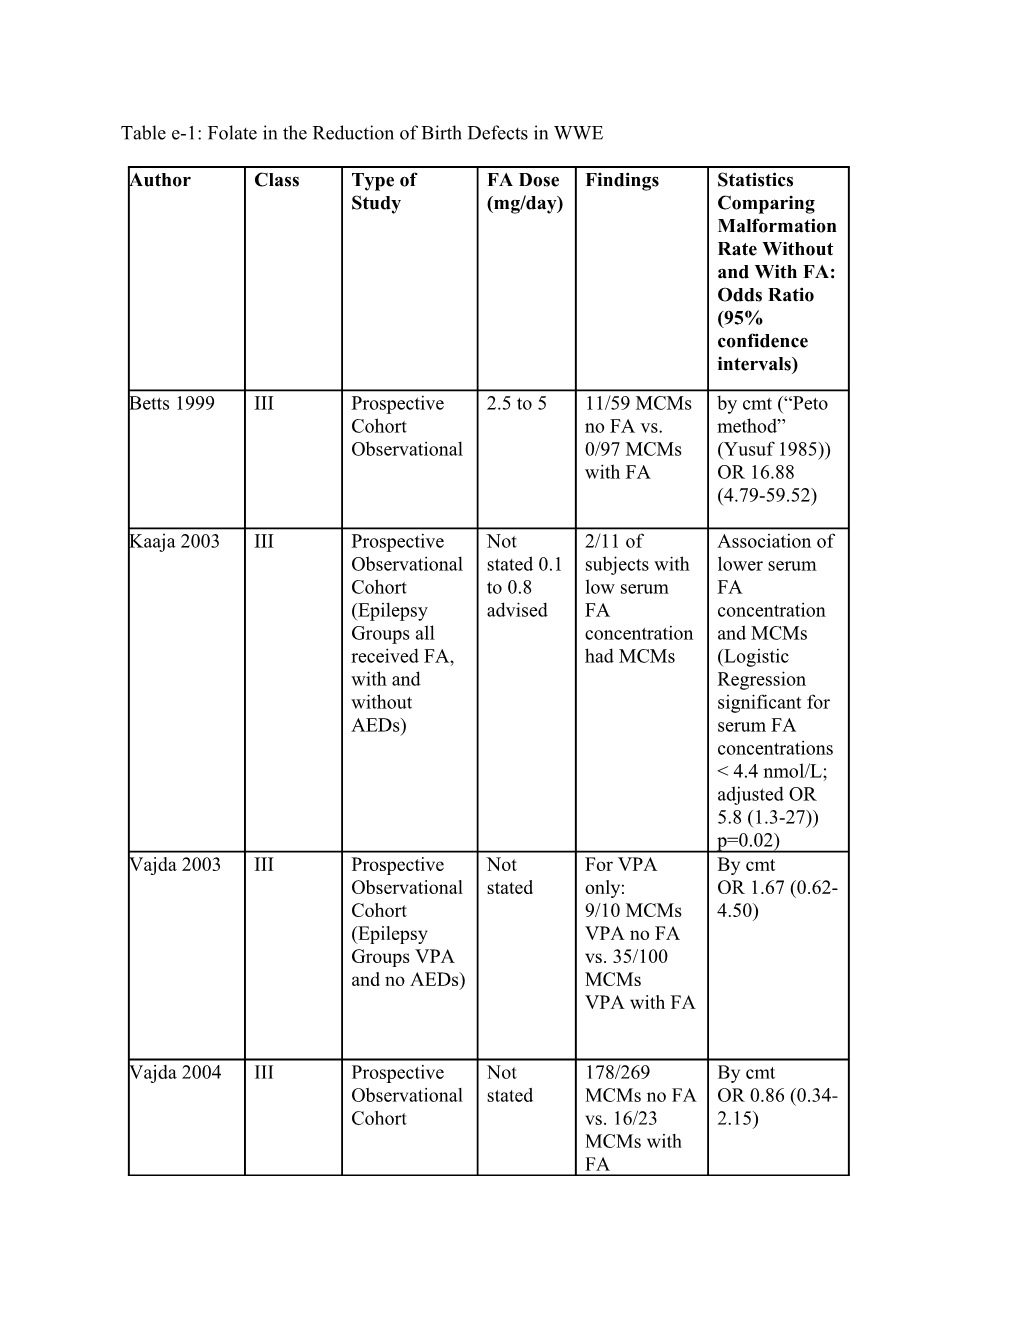 Table E-1: Folate in the Reduction of Birth Defects in WWE